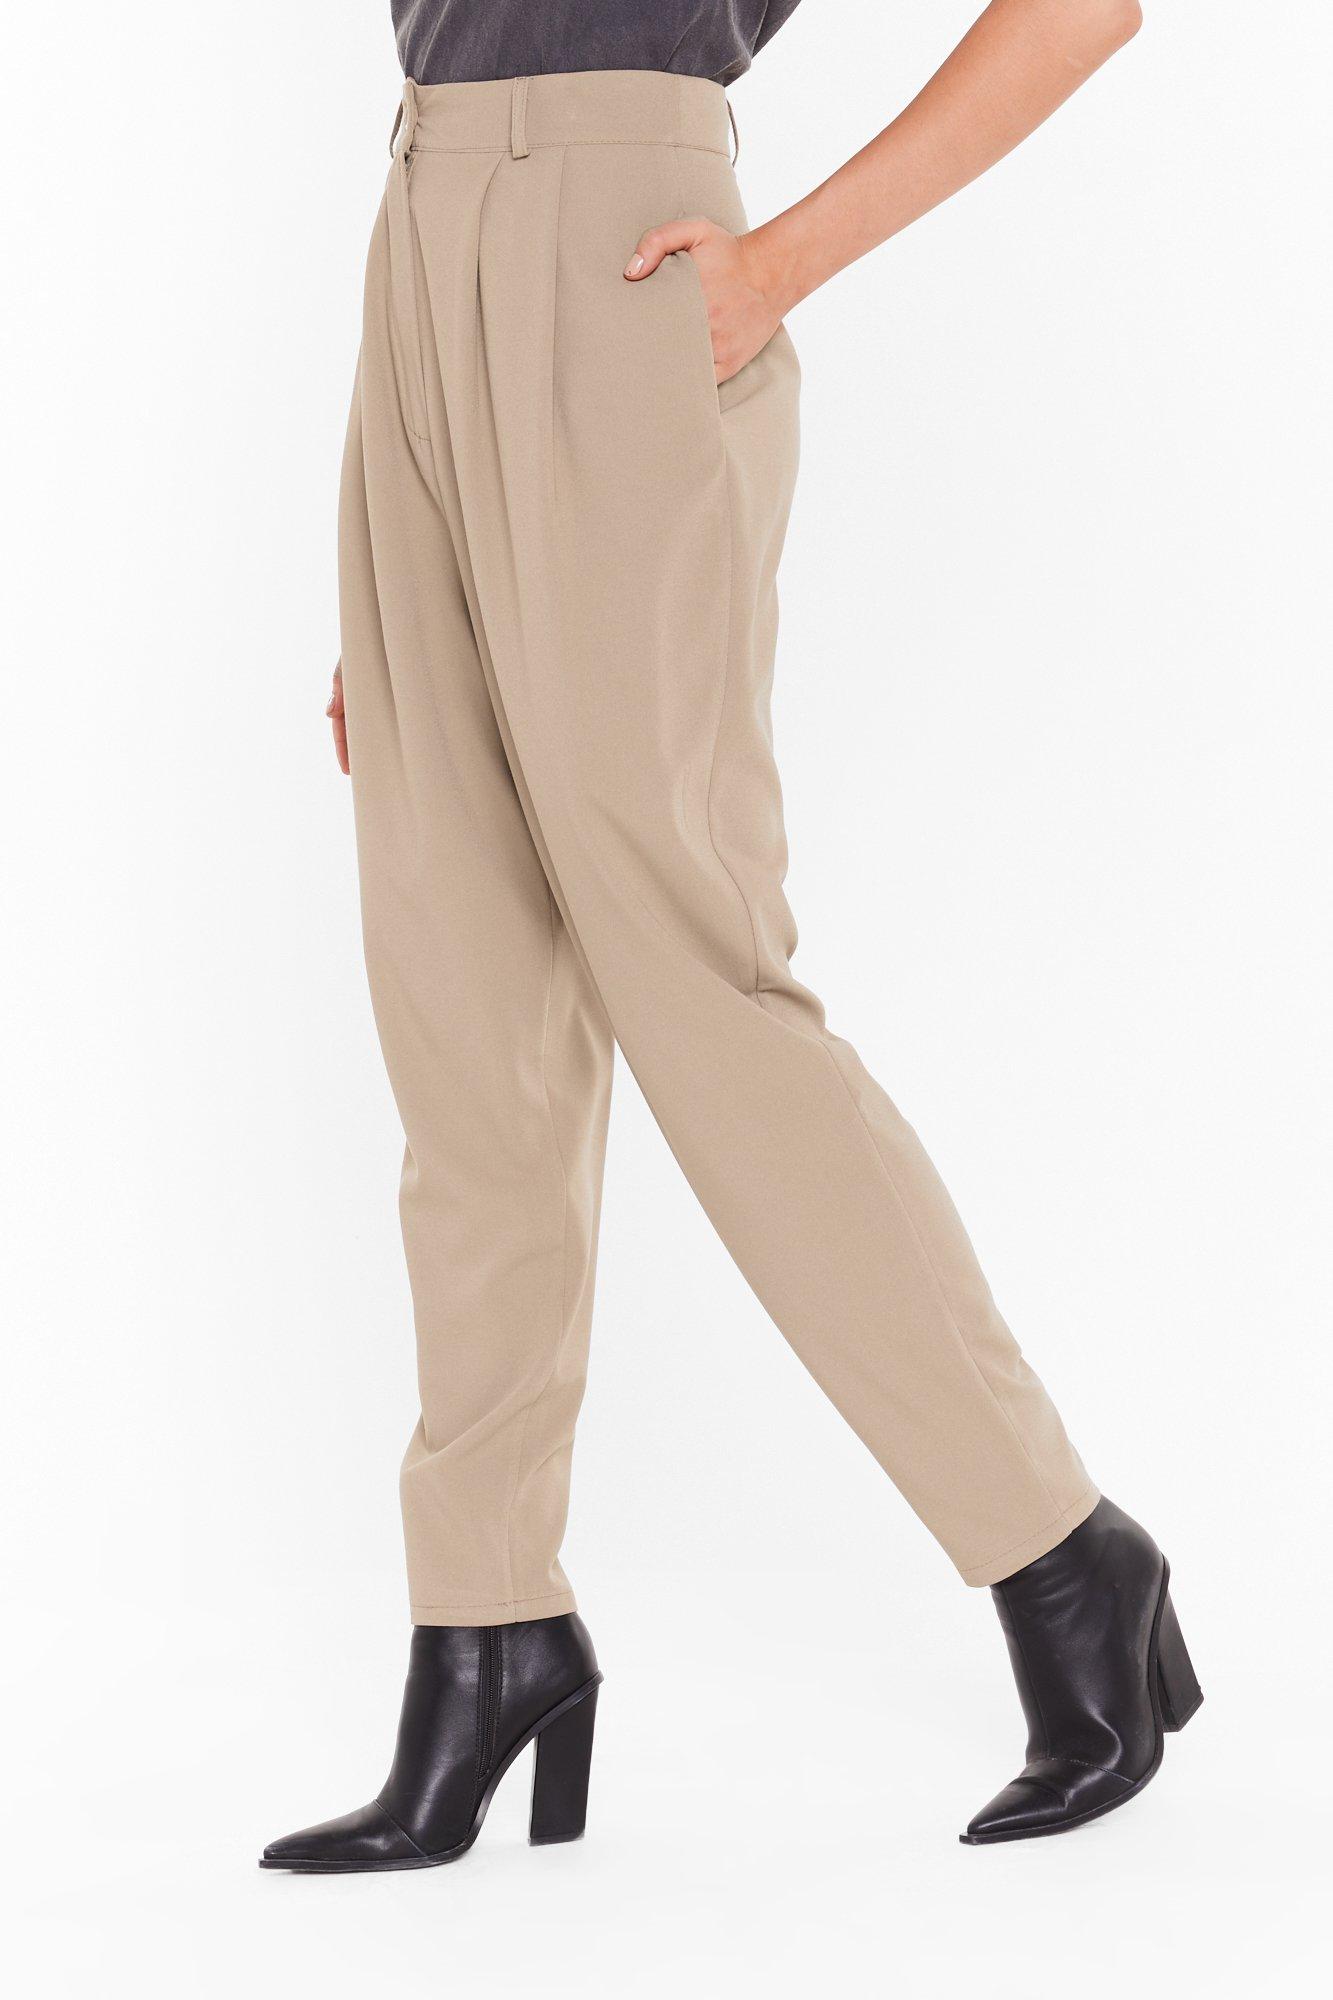 Pleat Don't Go High-Waisted Tapered Pants  Tapered pants, Pants for women, High  waisted